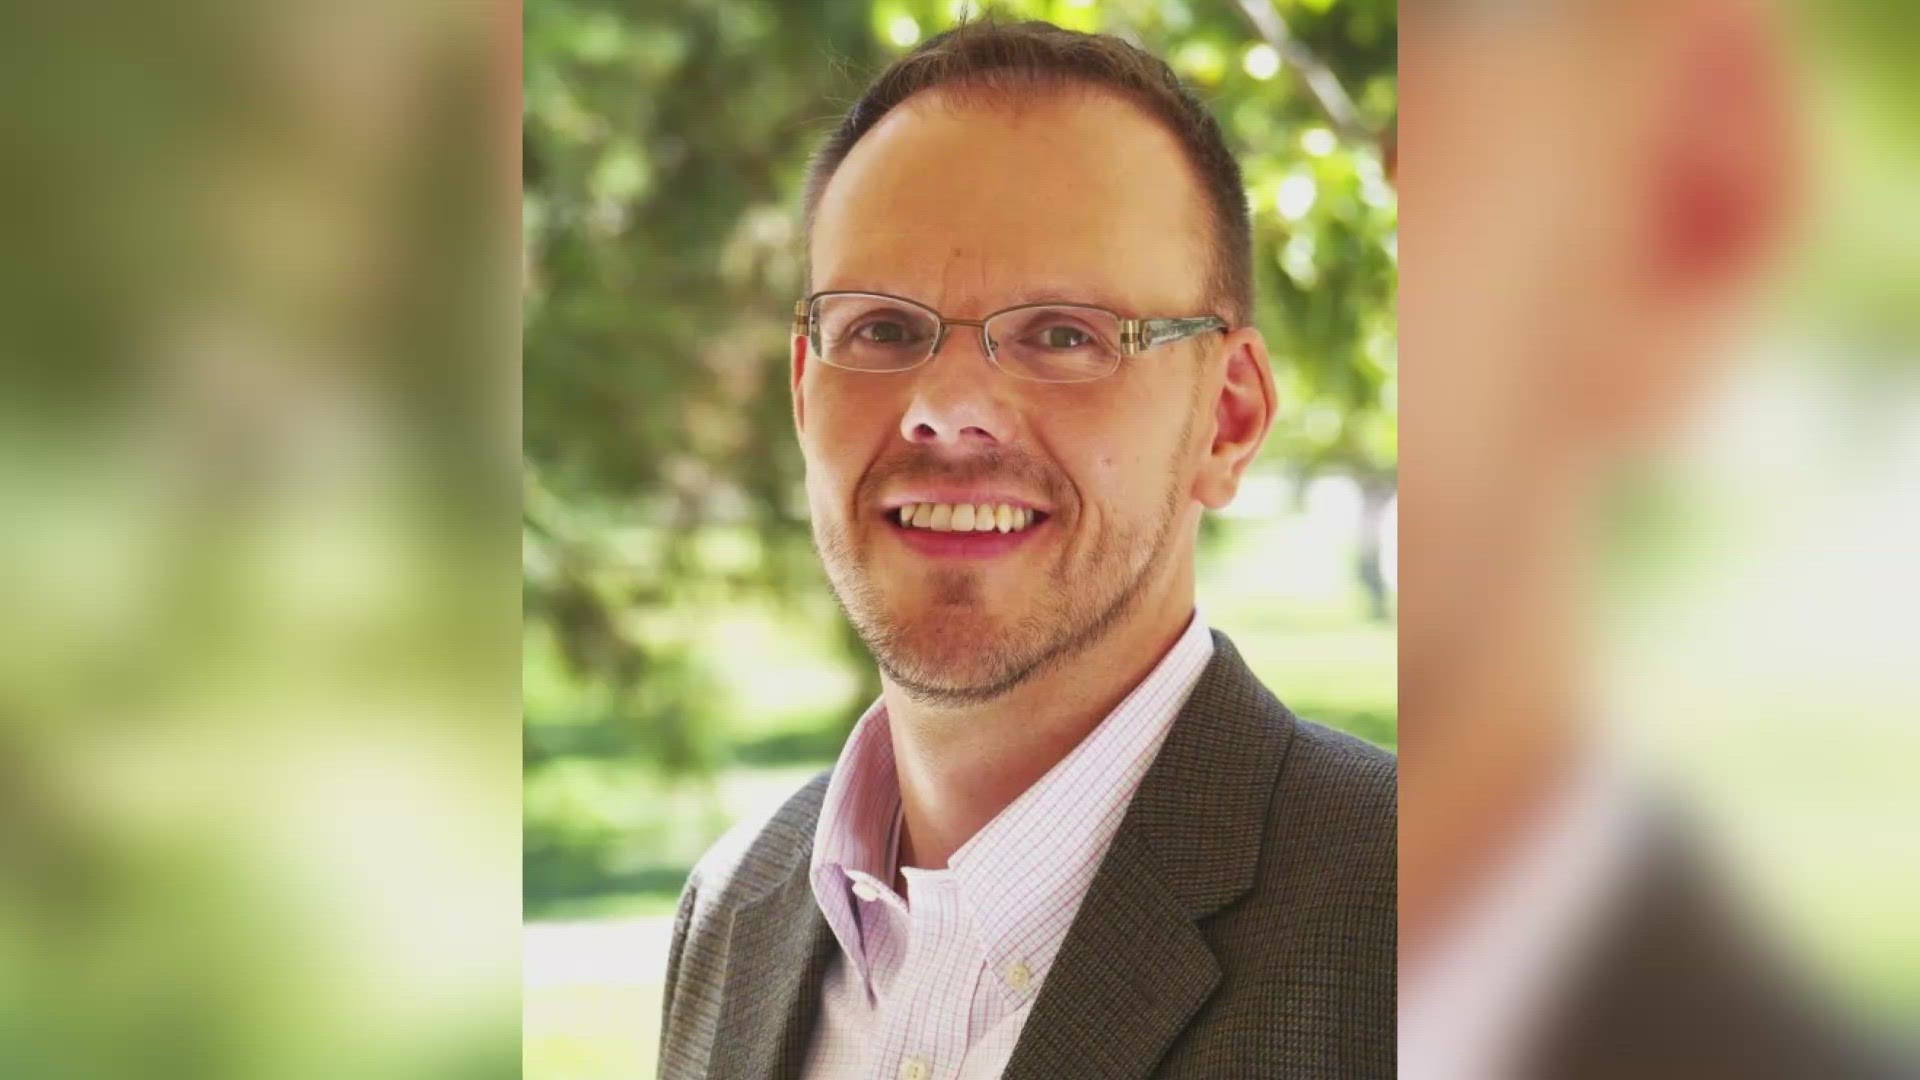 Force Sex With Niece - Rod Githens: UOP professor faces child sex abuse allegations | abc10.com